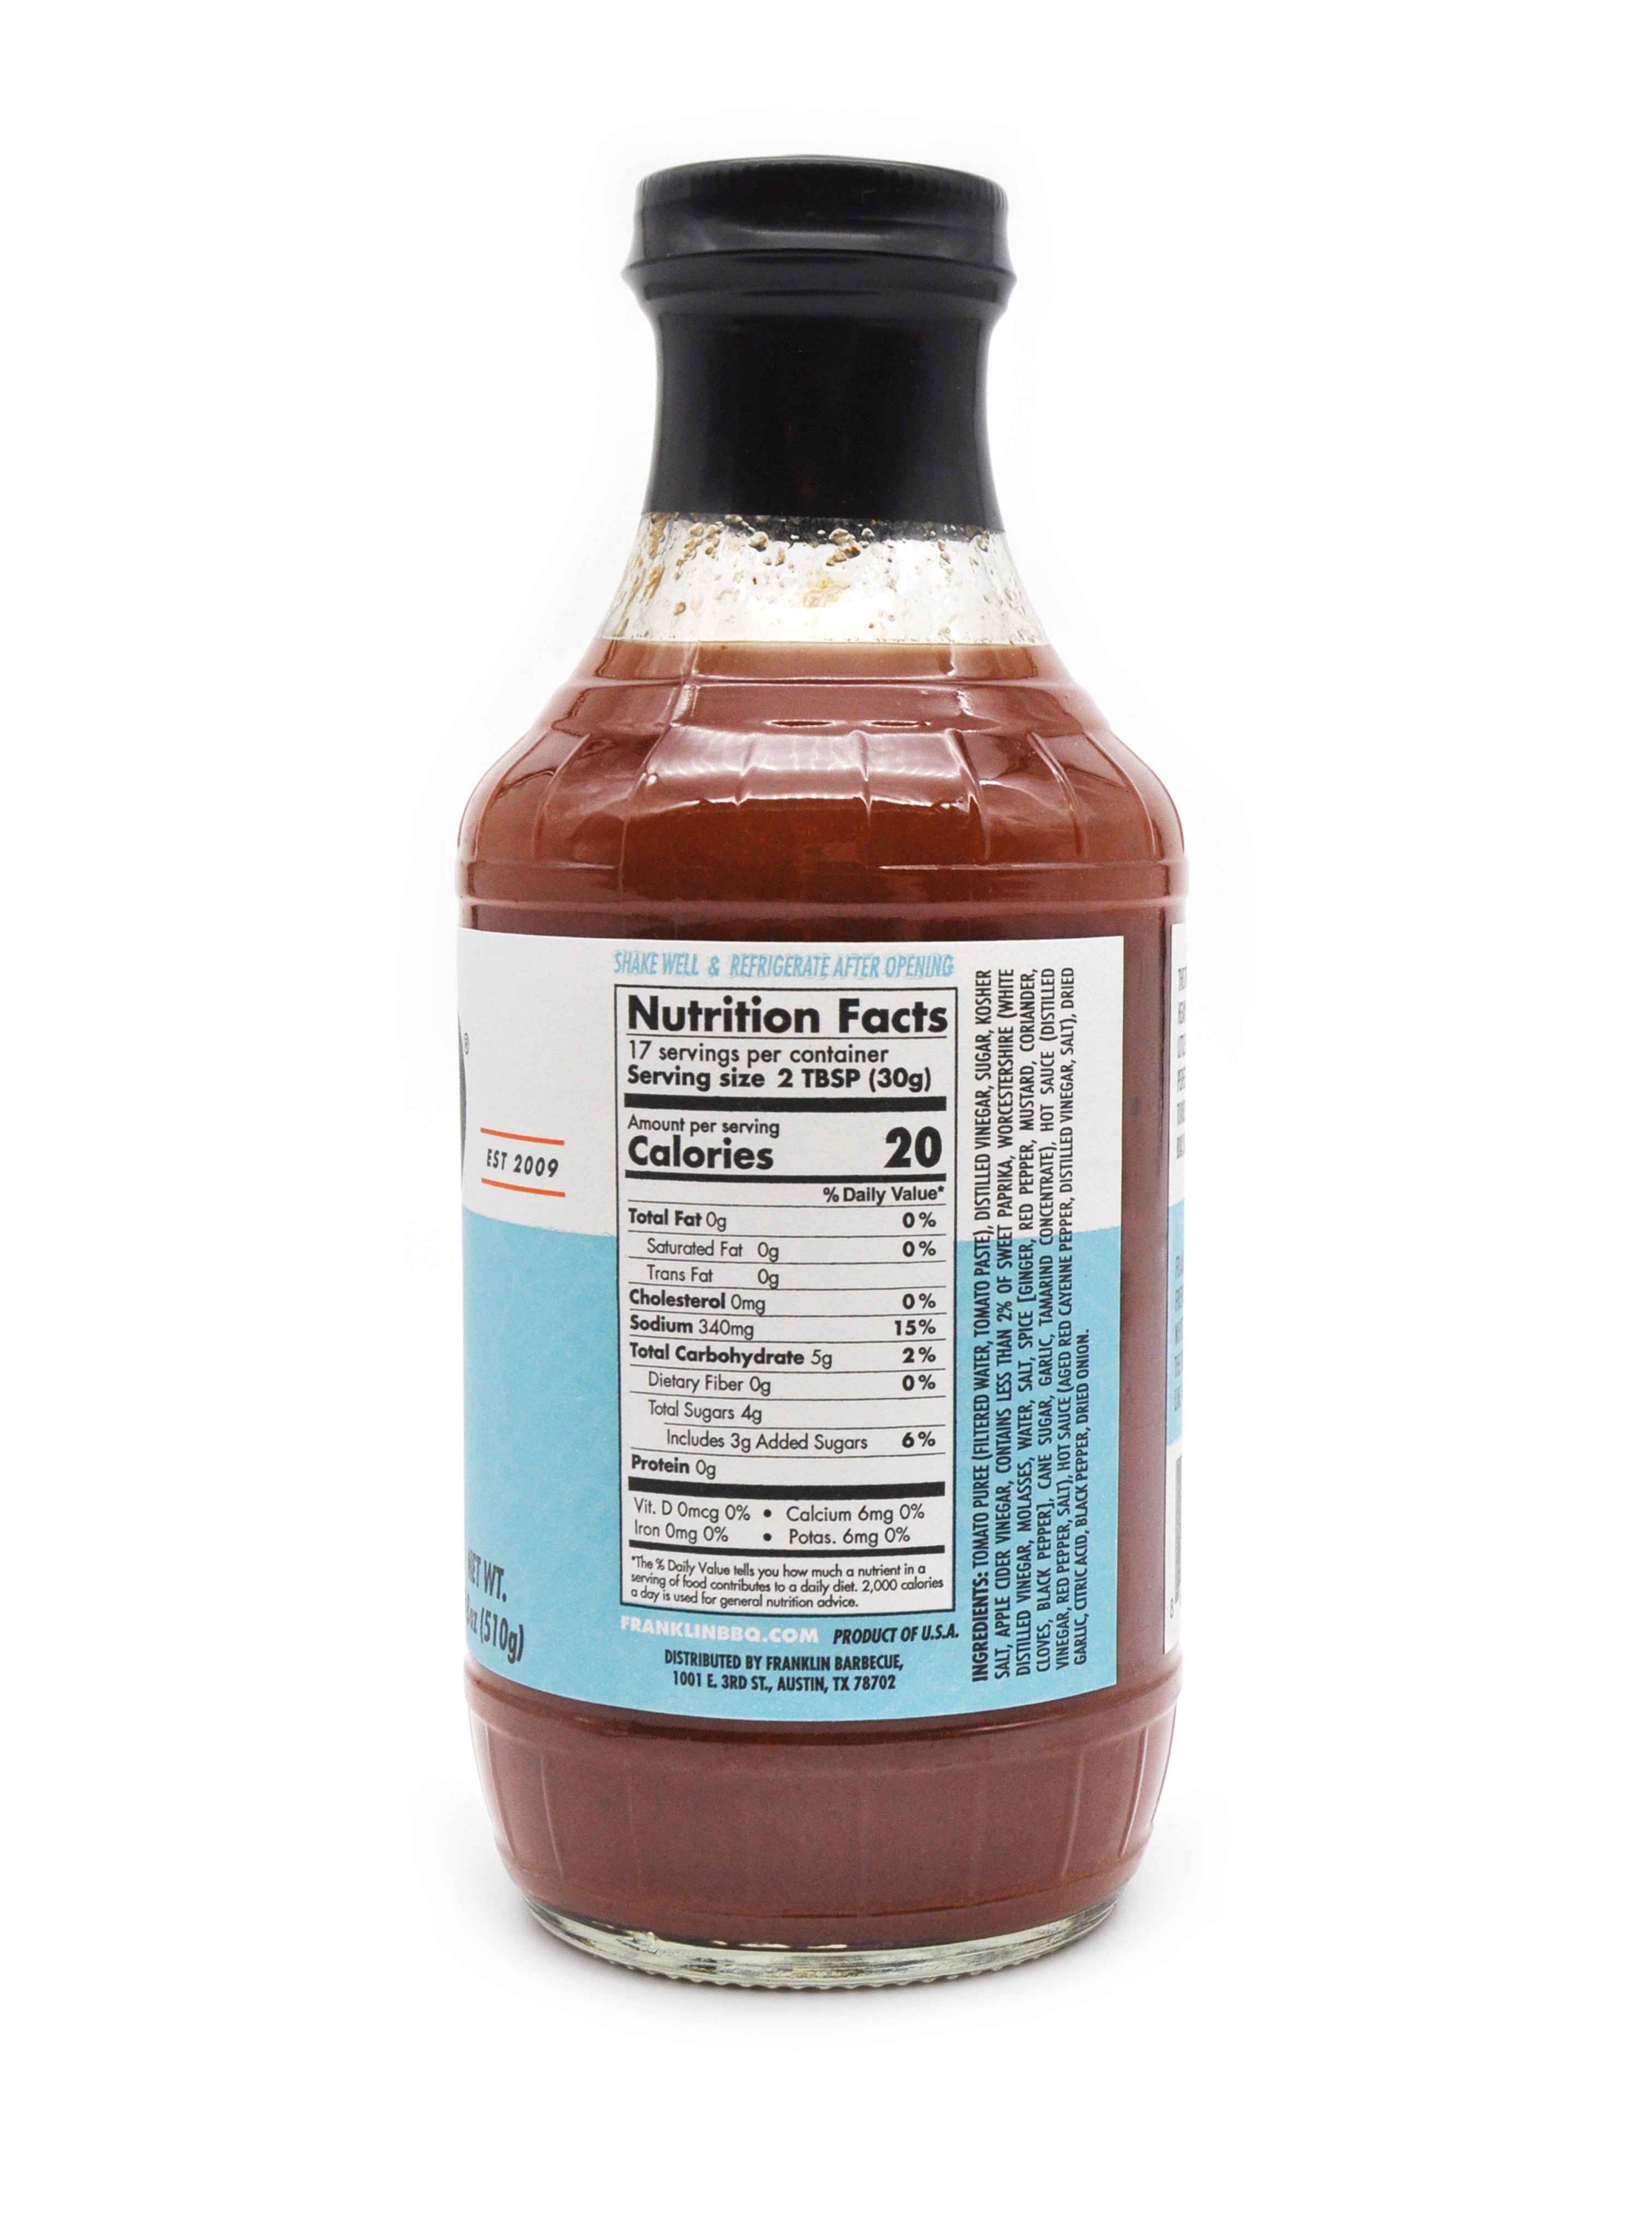 Back label of Franklin Barbecue Vinegar sauce showing nutrition facts and ingredient list.